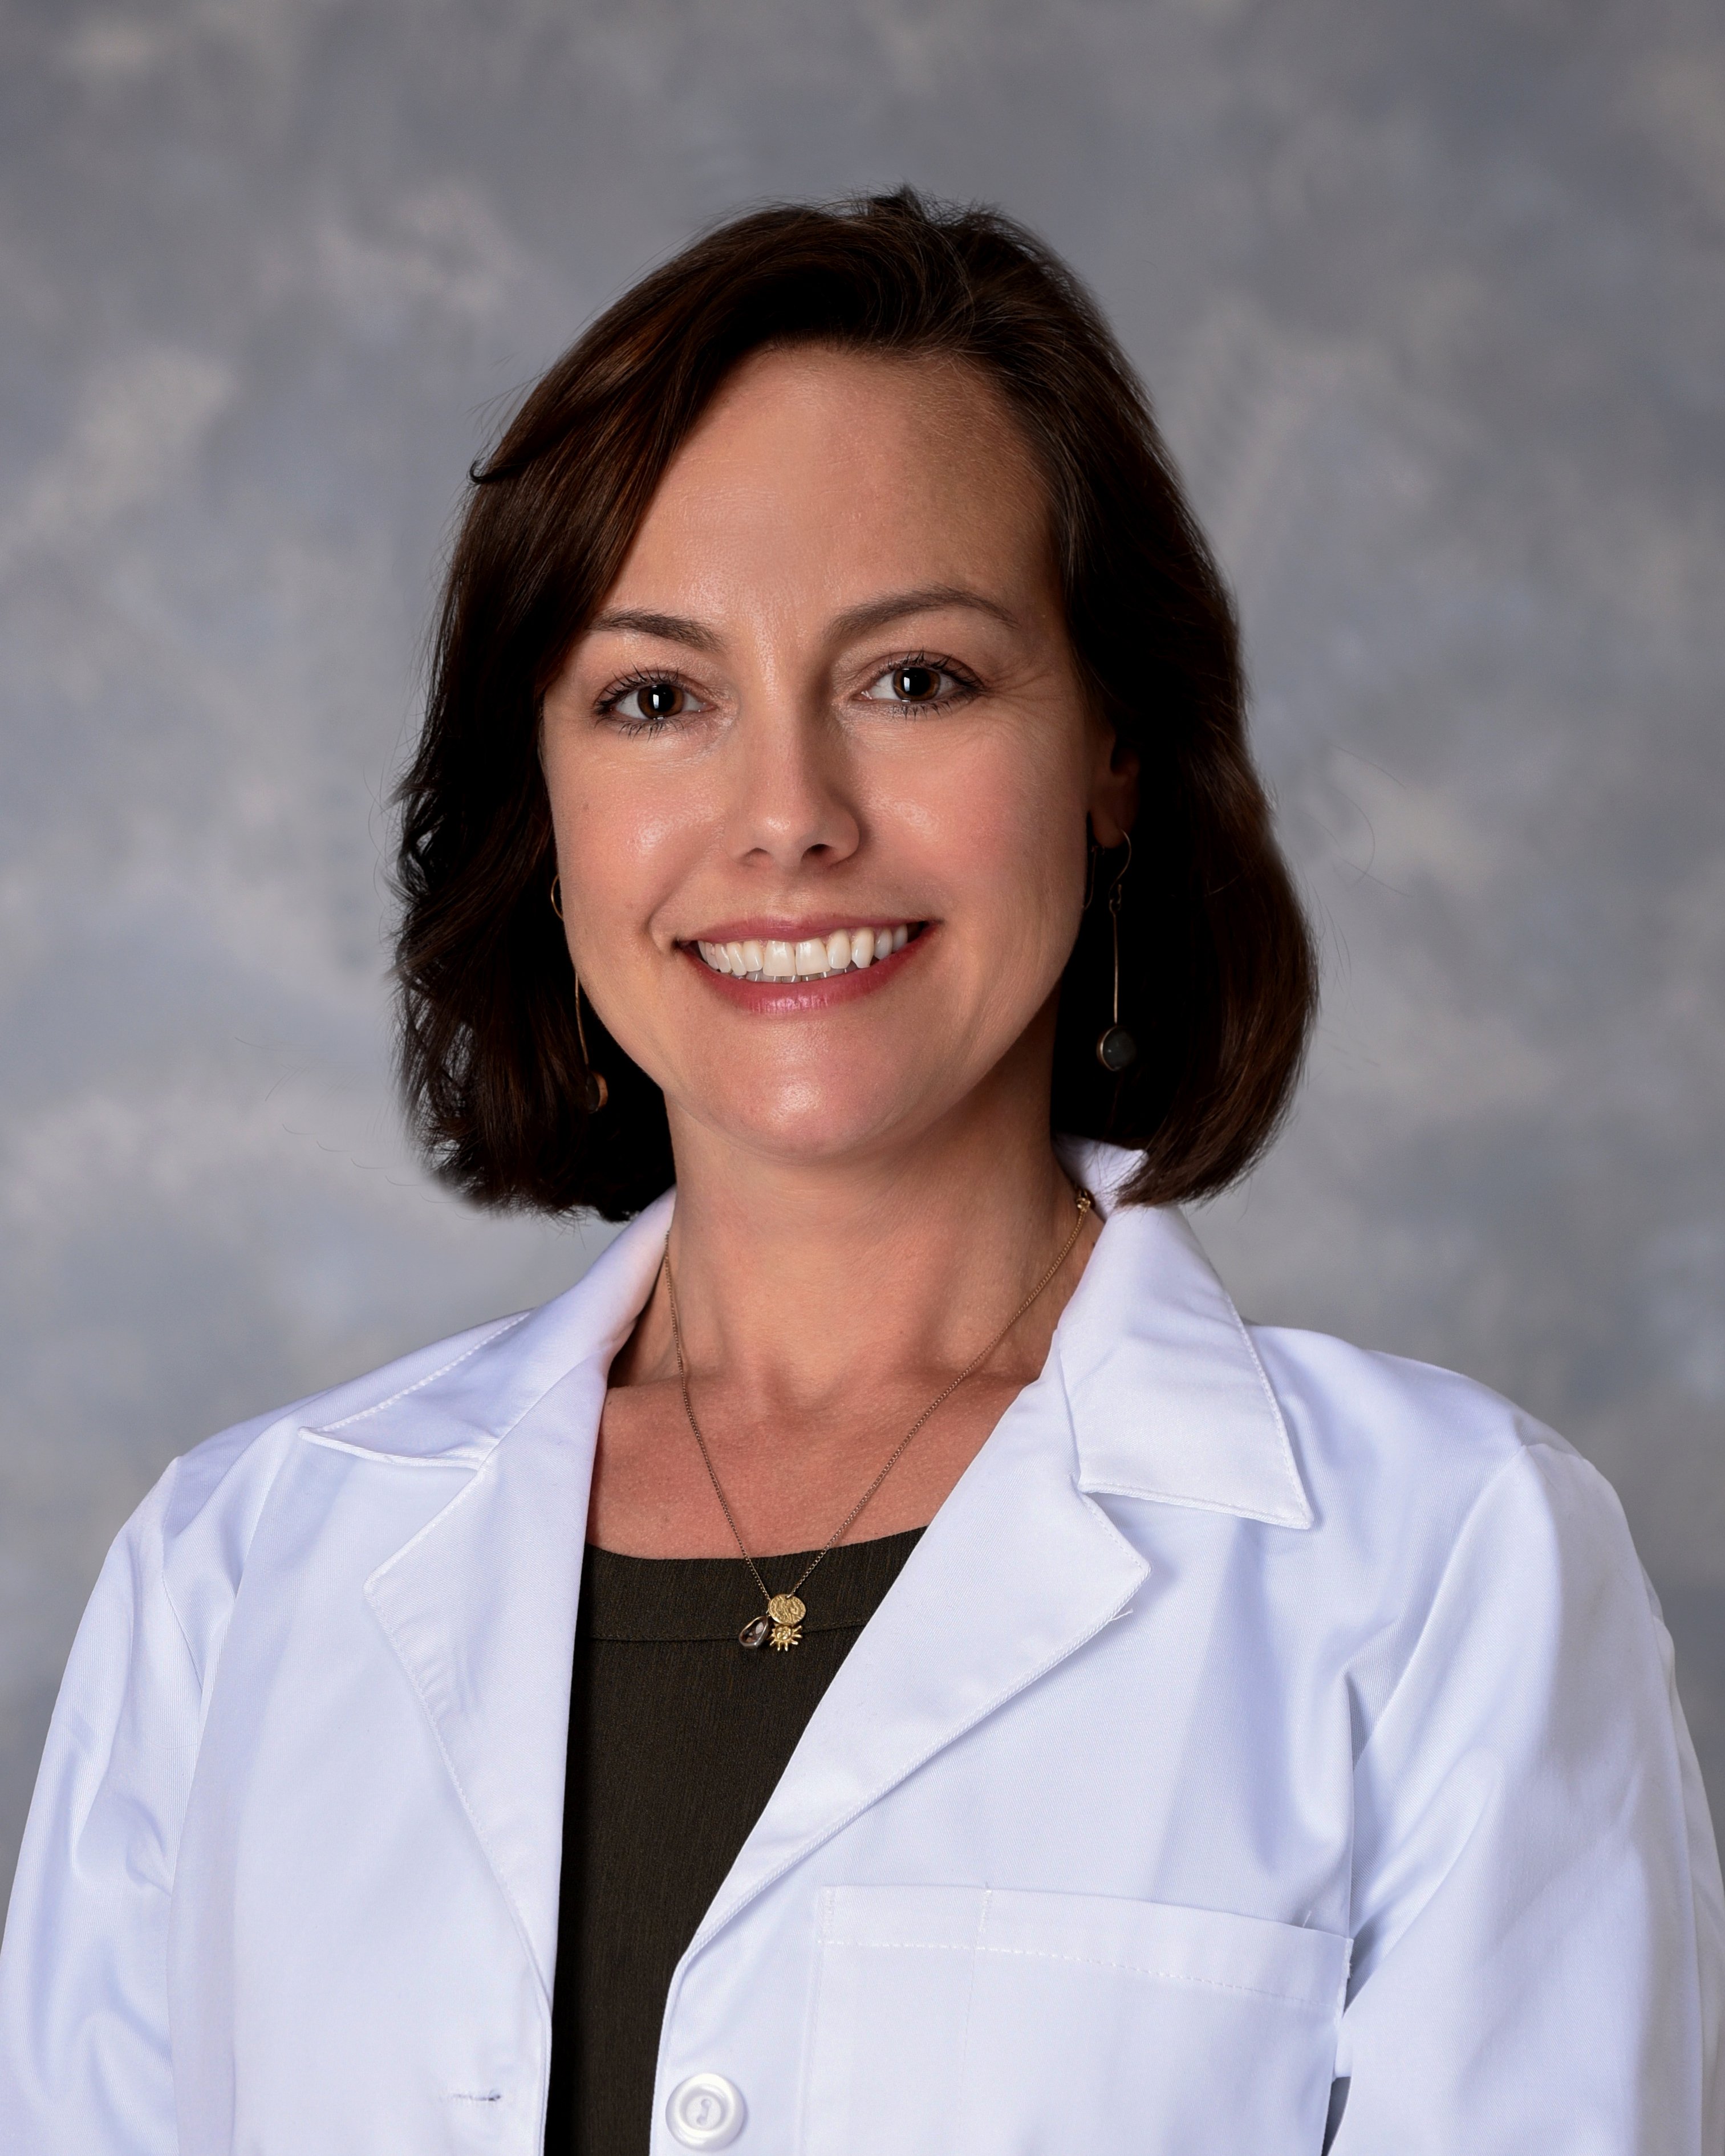 Kimberly Meiners, M.D.